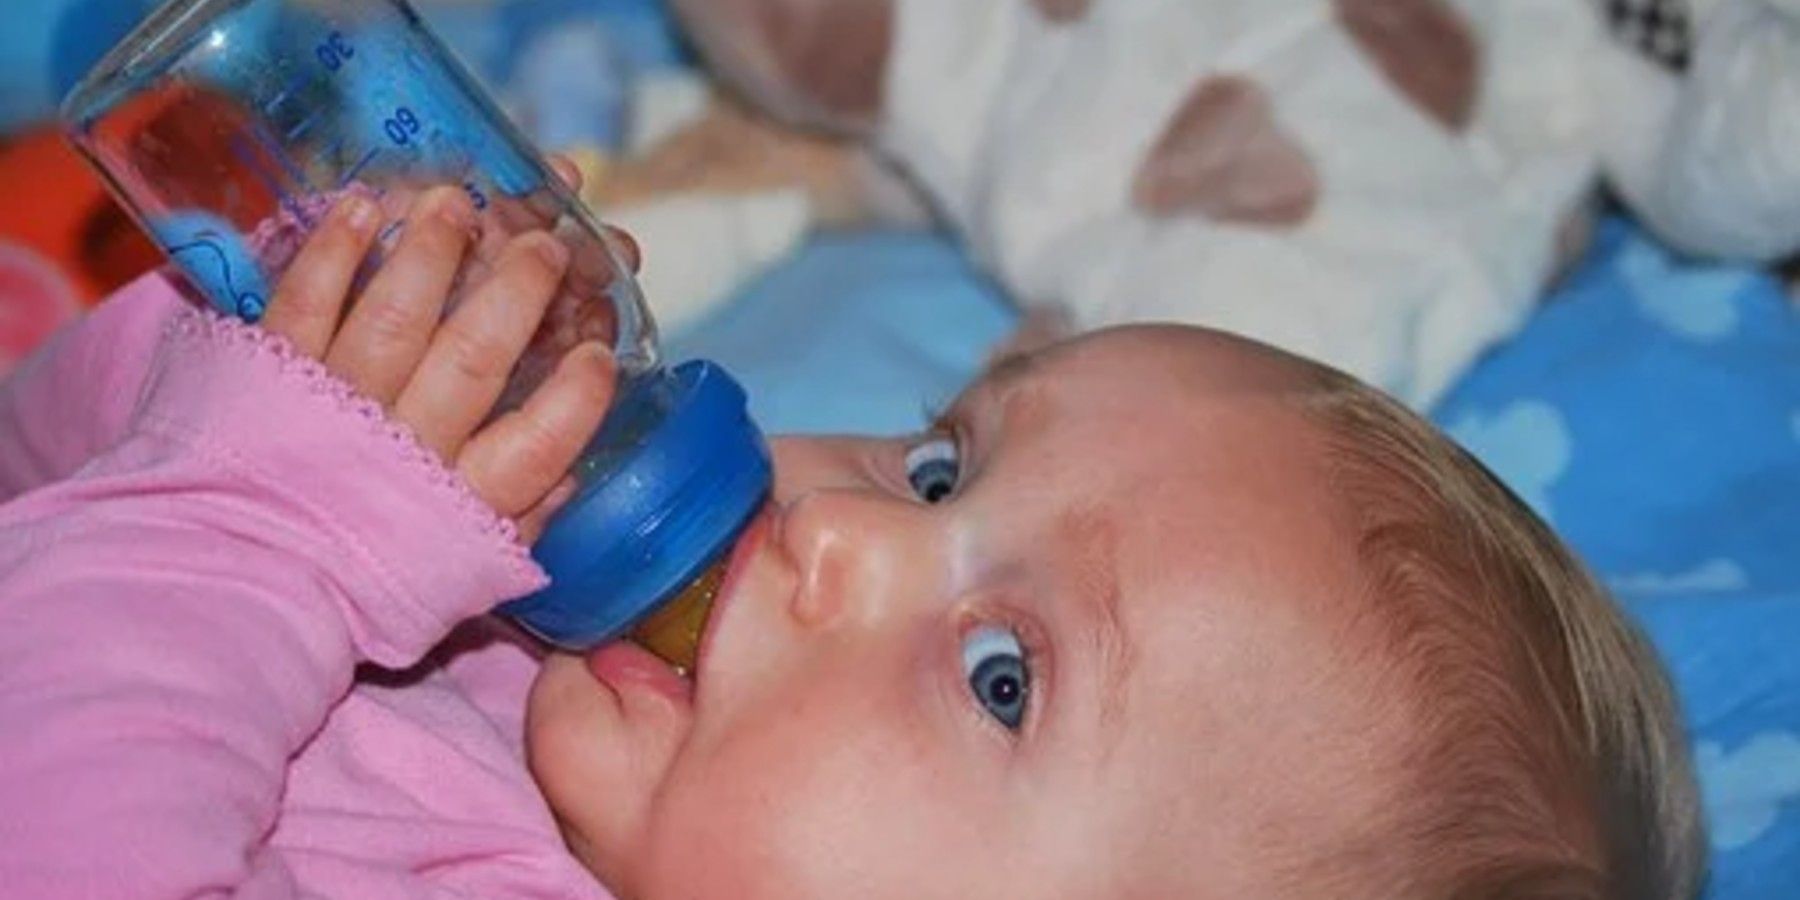 Child being fed through a bottle, and they are not the world's longest breastfed baby.